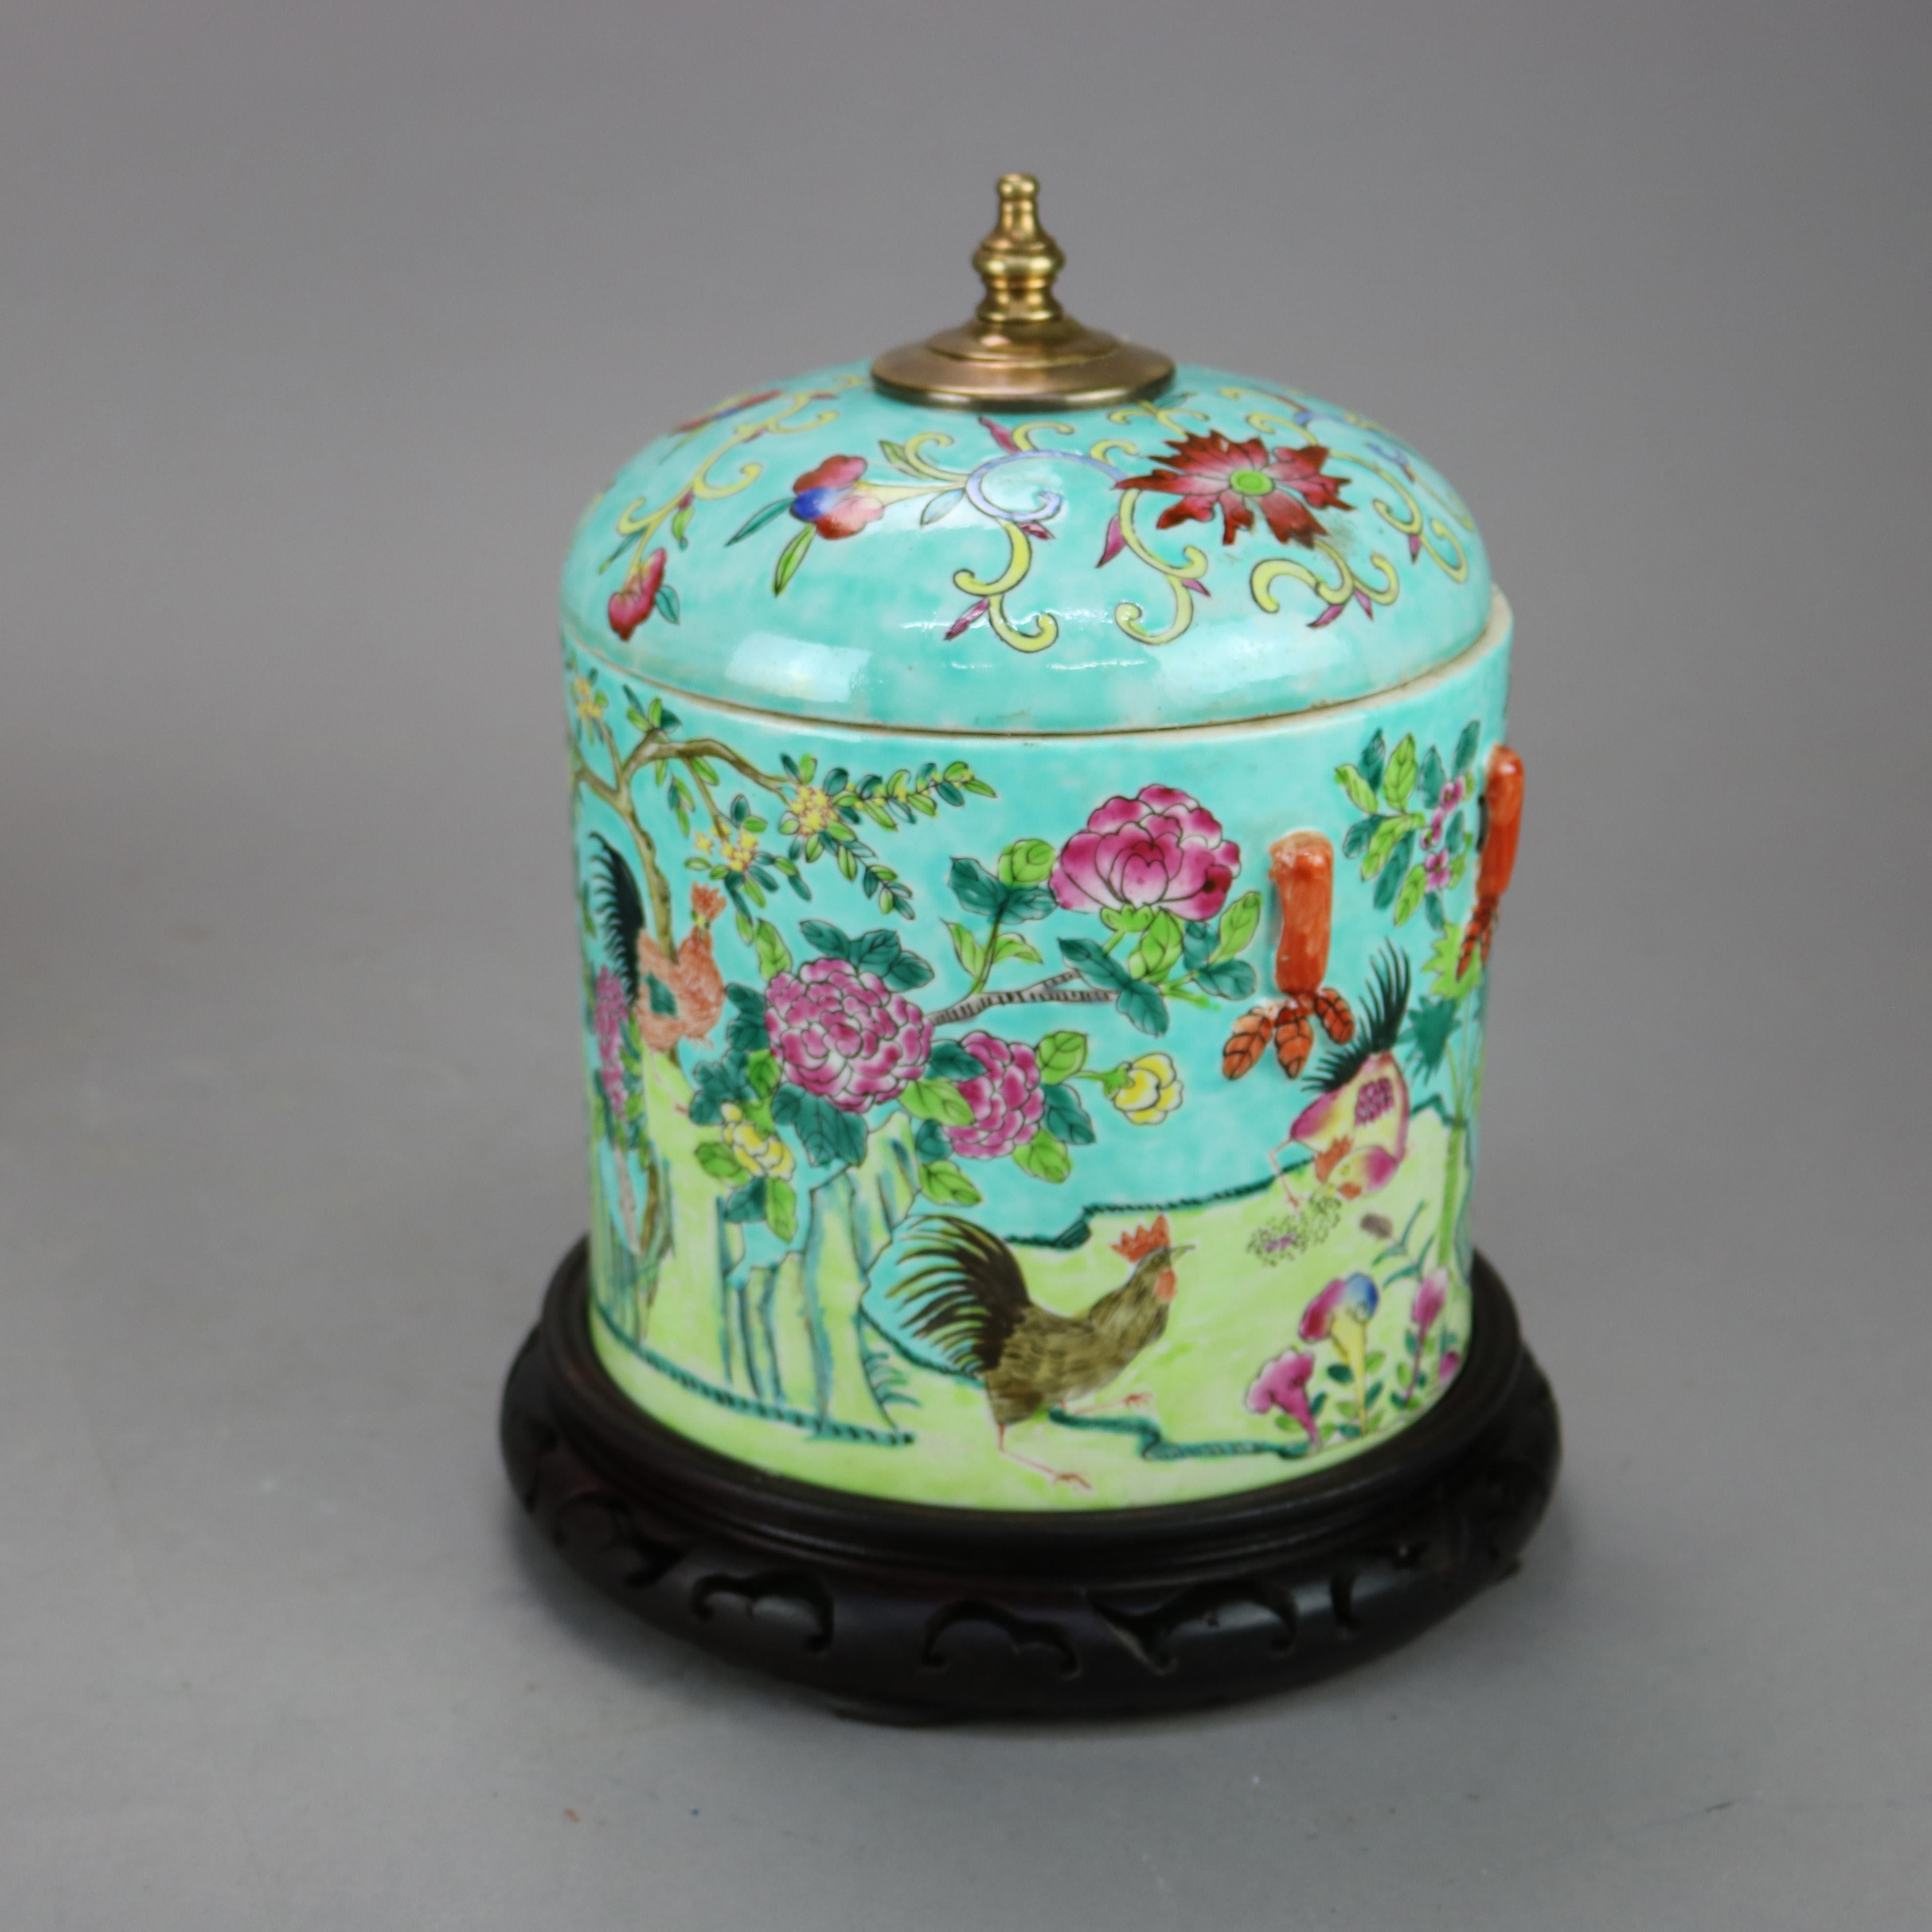 An antique Chinese porcelain covered jar offers hand painted garden motif with birds and flowers, flanking handles and is seated on carved hardwood stand, marked on base as photographed, c1930

Measures - 11.5''H x 8.25''W x 8.25''D; Jar 9.75'' x